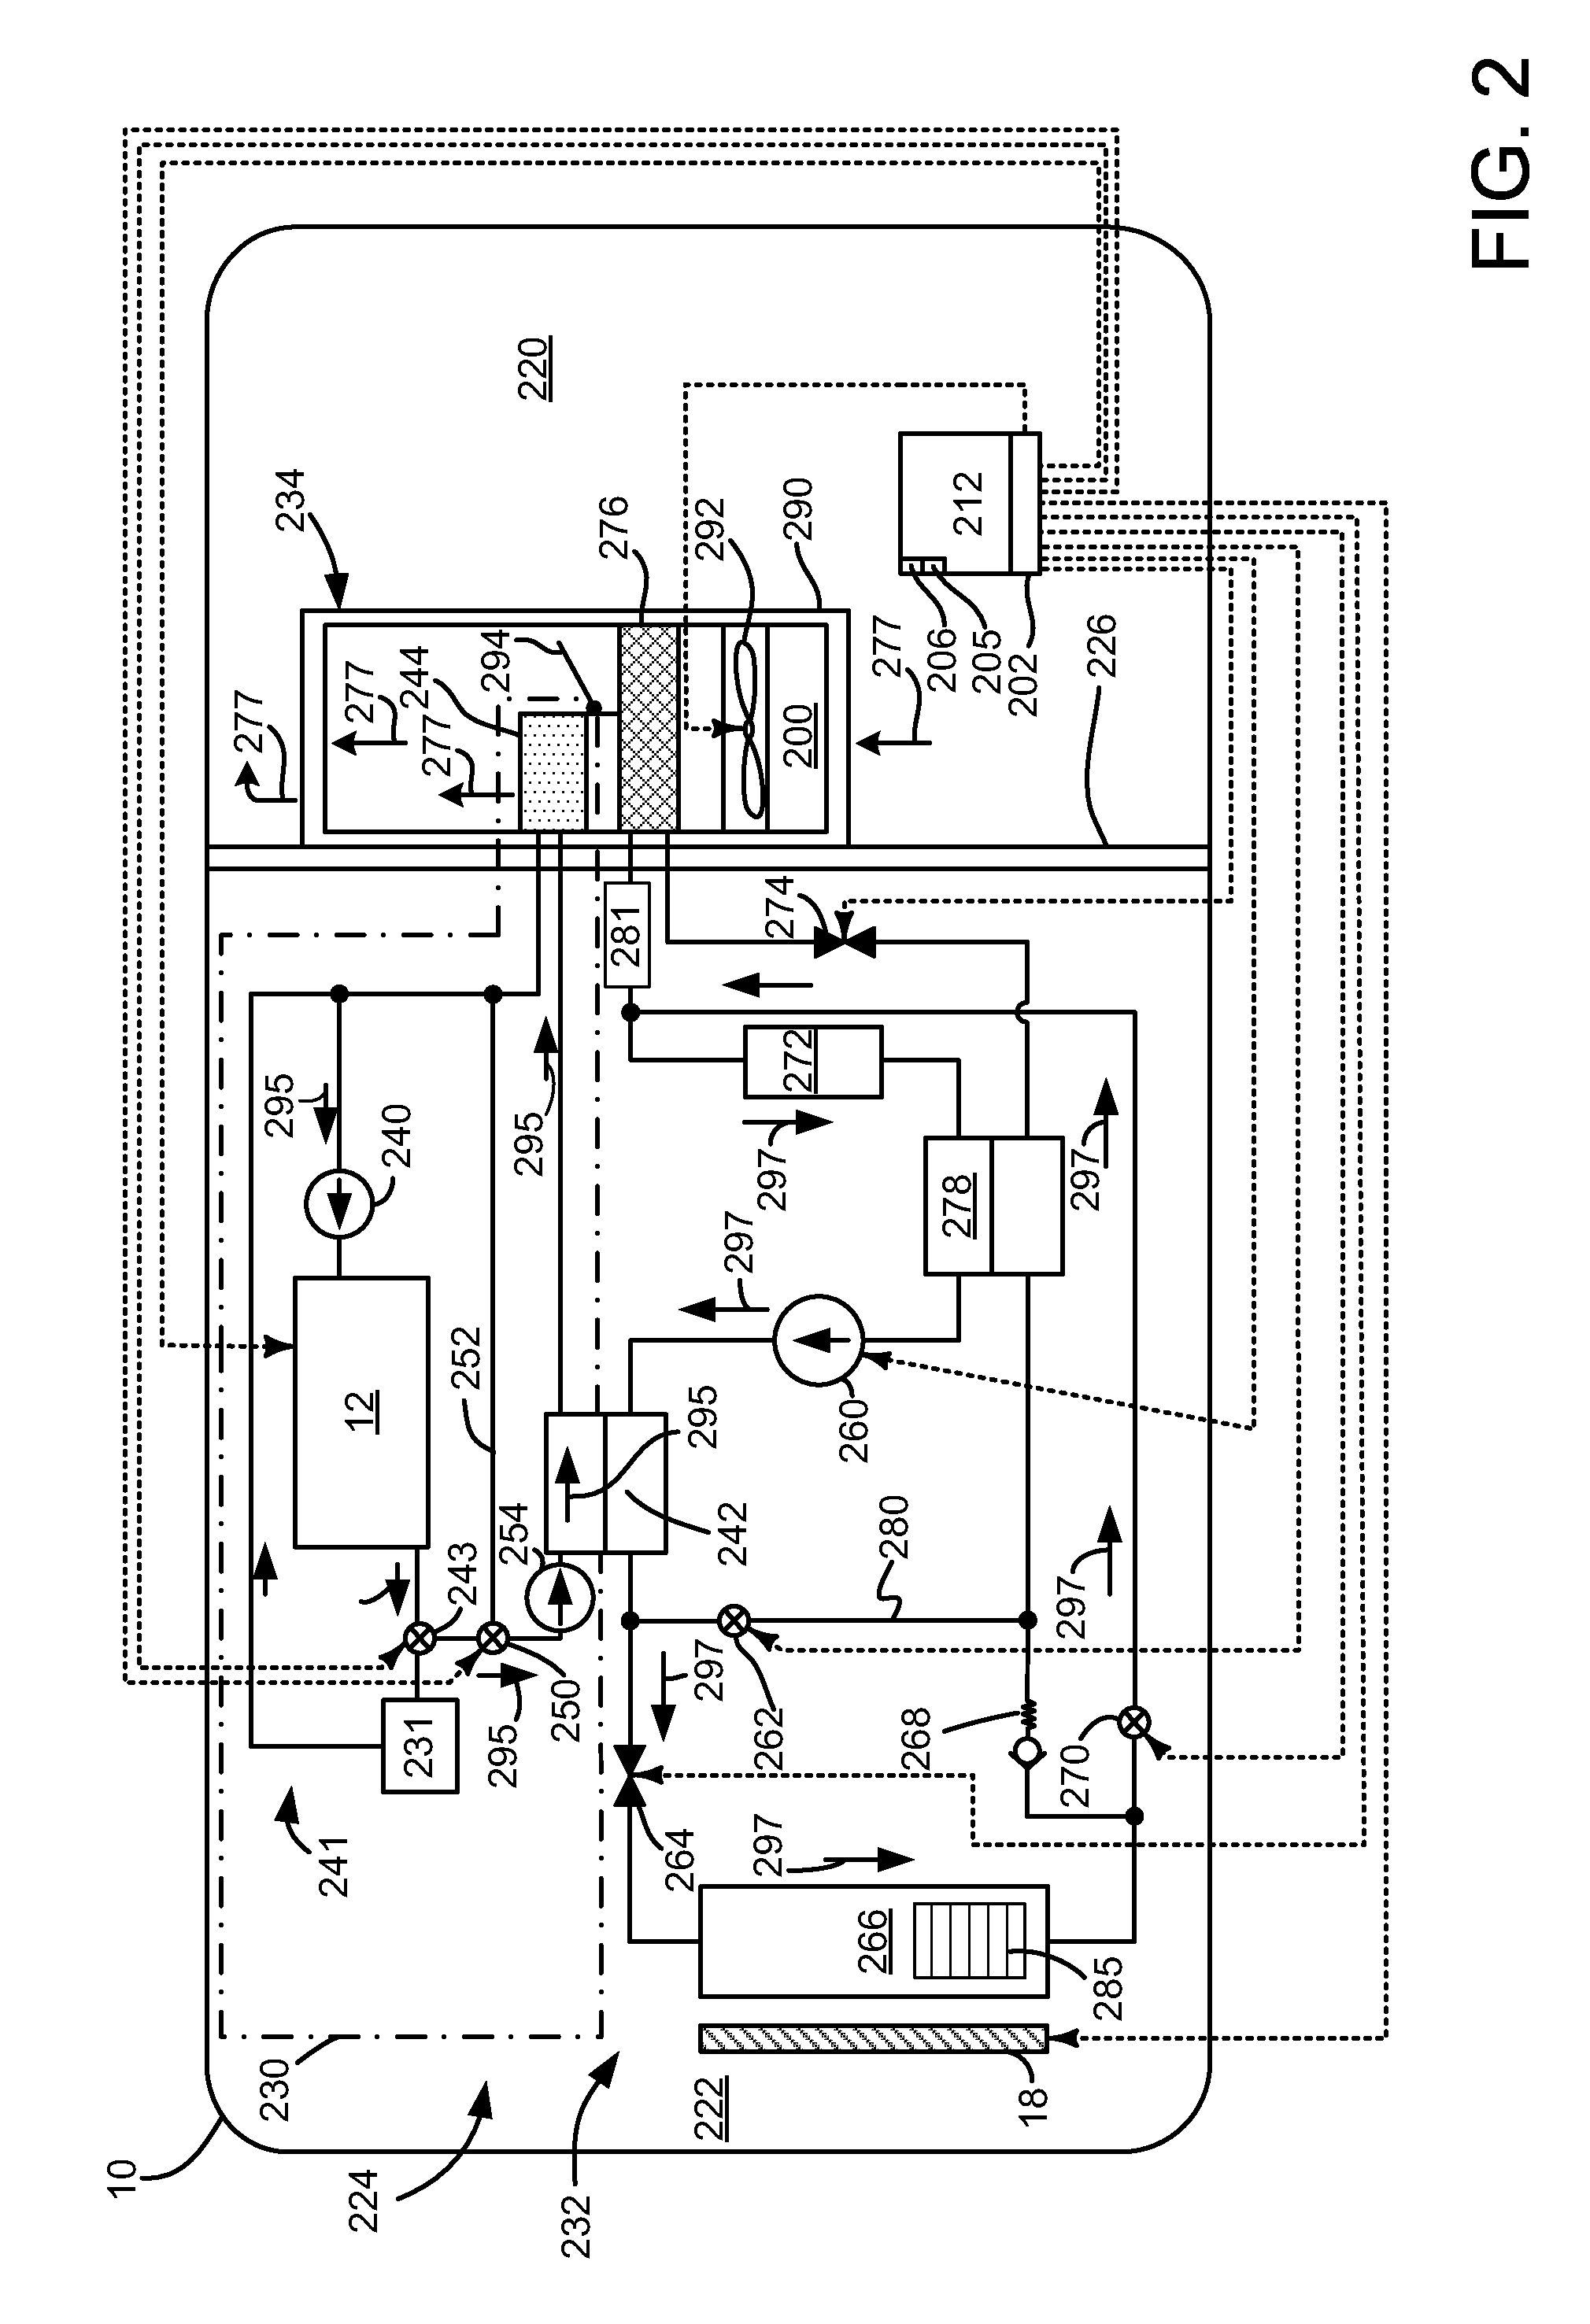 Method and system for reducing the possibility of vehicle heat exchanger freezing